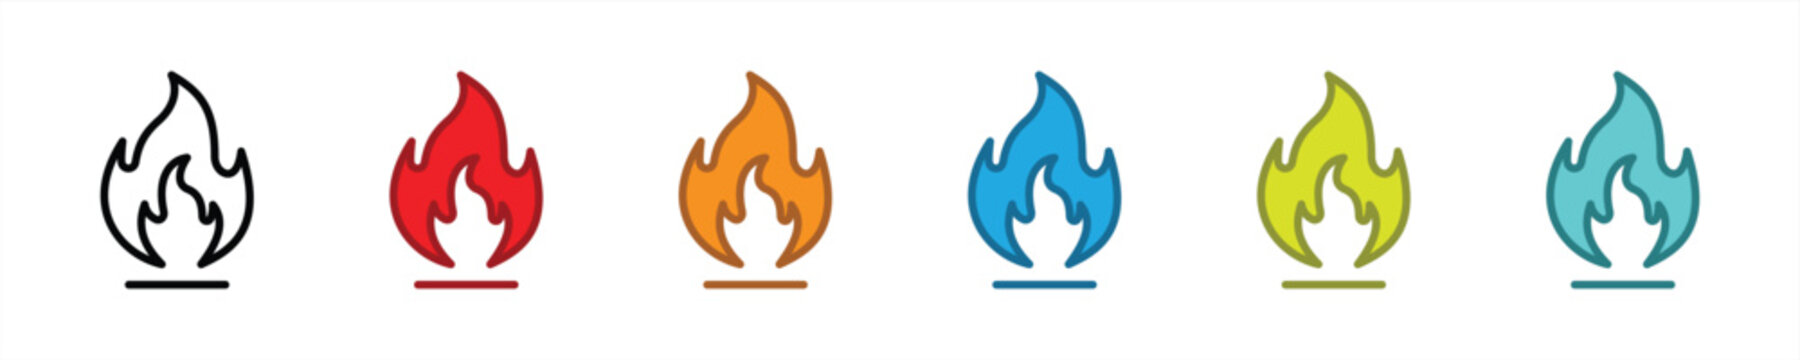 fire icon set. flame icon colorful sign symbol collections, vector illustration